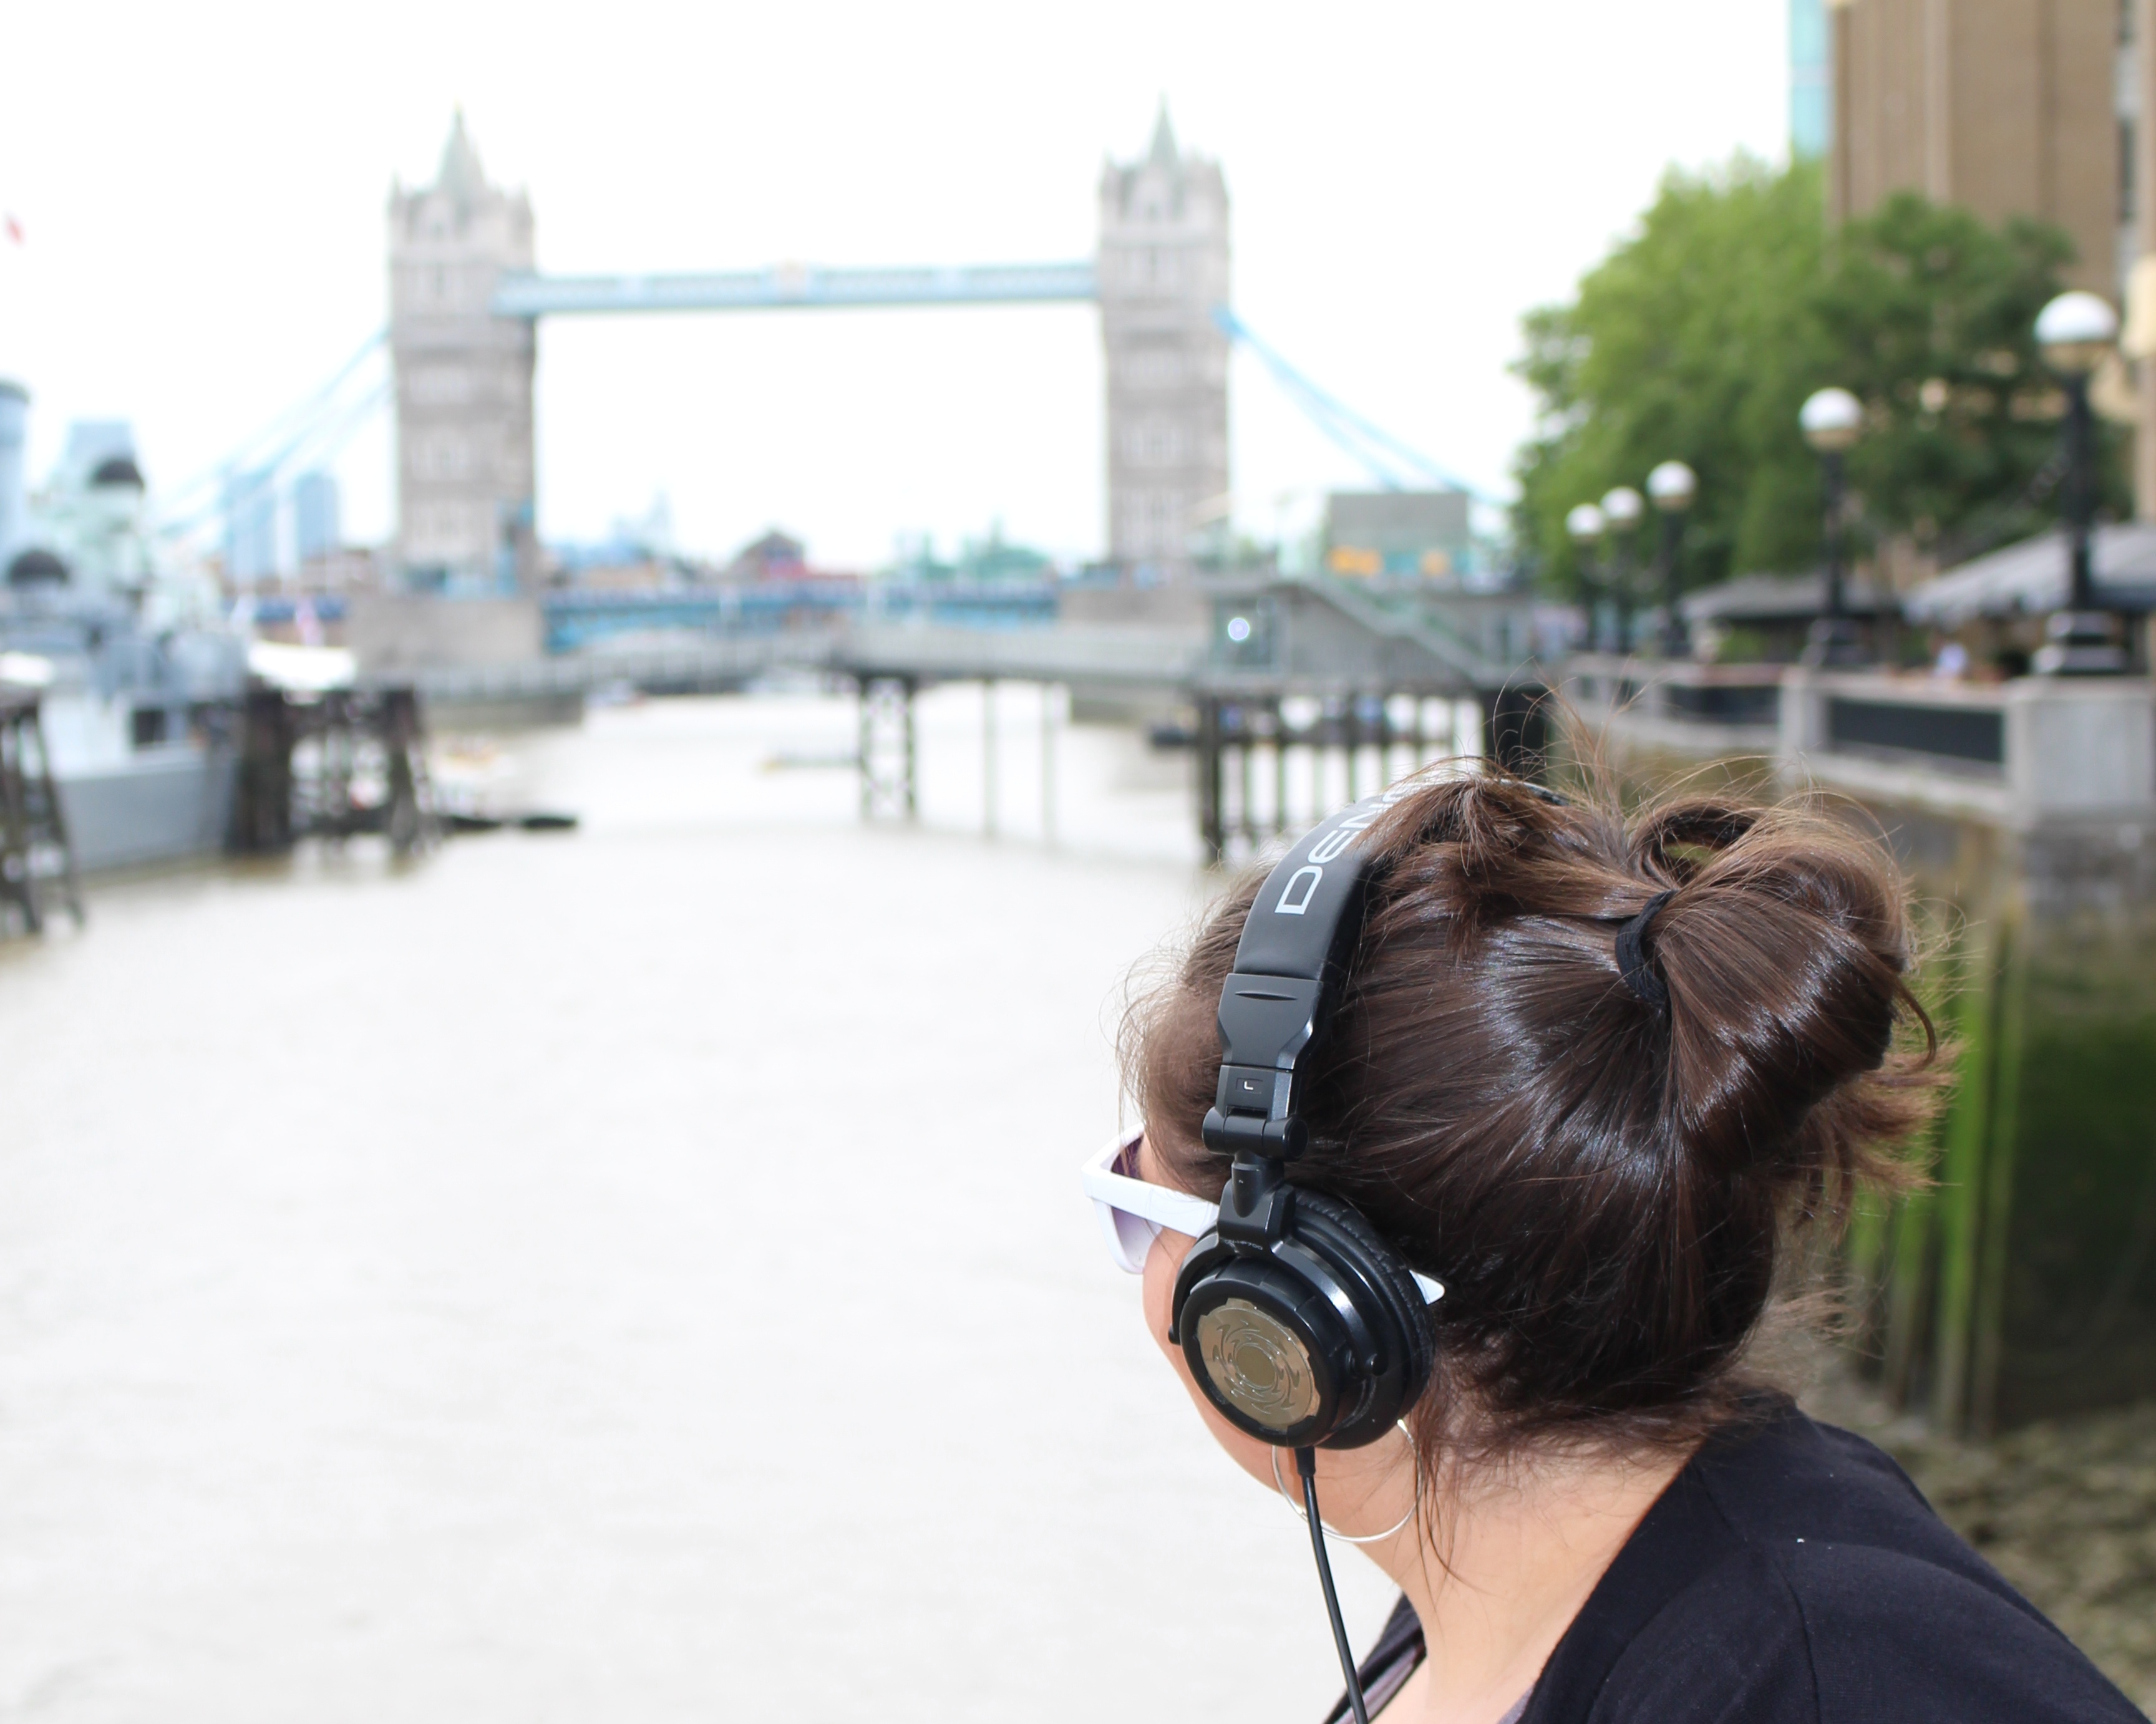 Leah Barclay listening to the Thames - Photo by Simon Linke